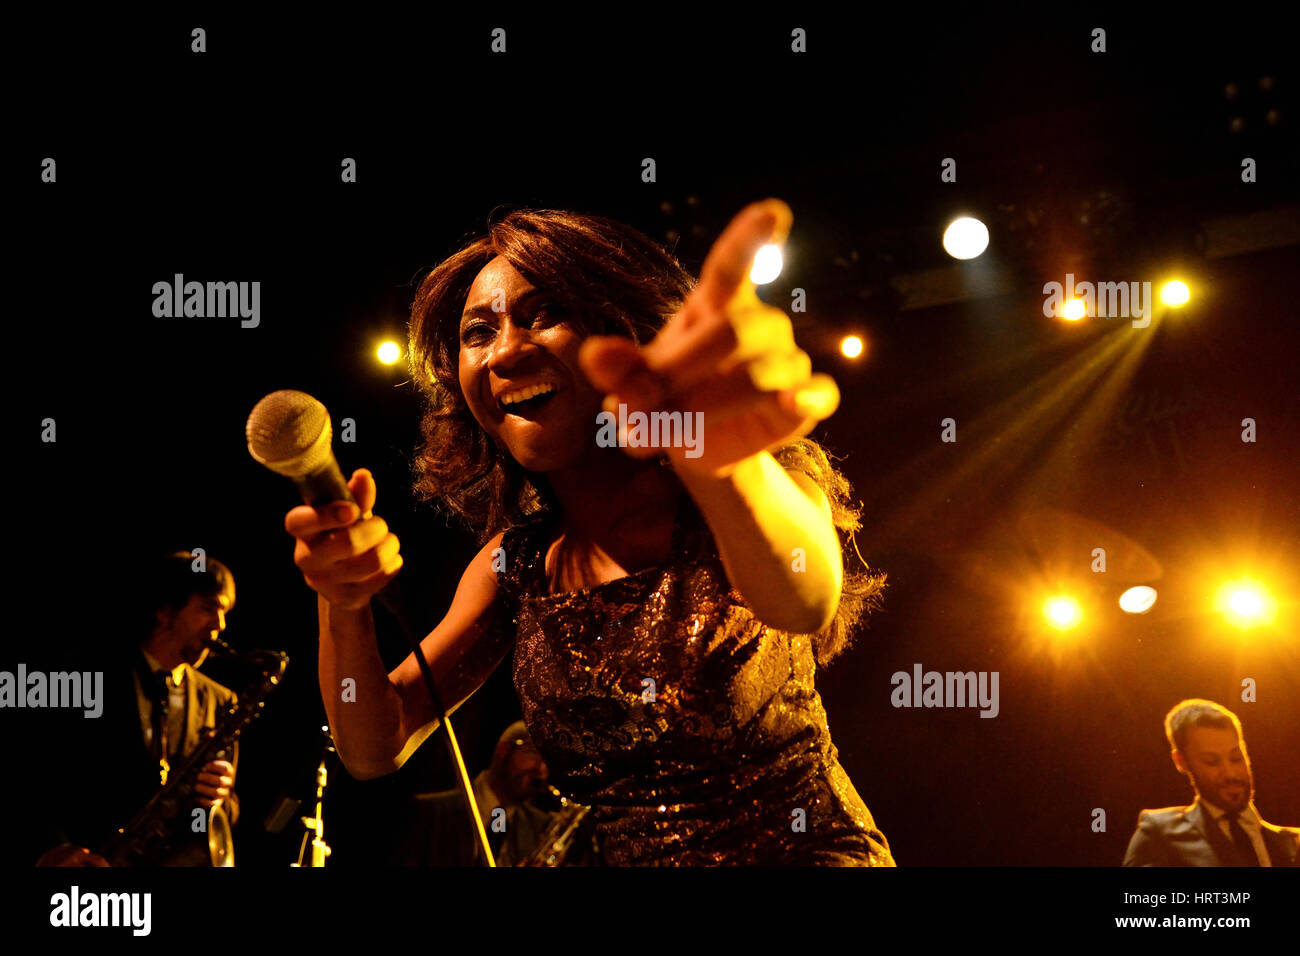 BARCELONA - JAN 9: The Excitements (soul band) performs at Apolo venue on January 9, 2015 in Barcelona, Spain. Stock Photo